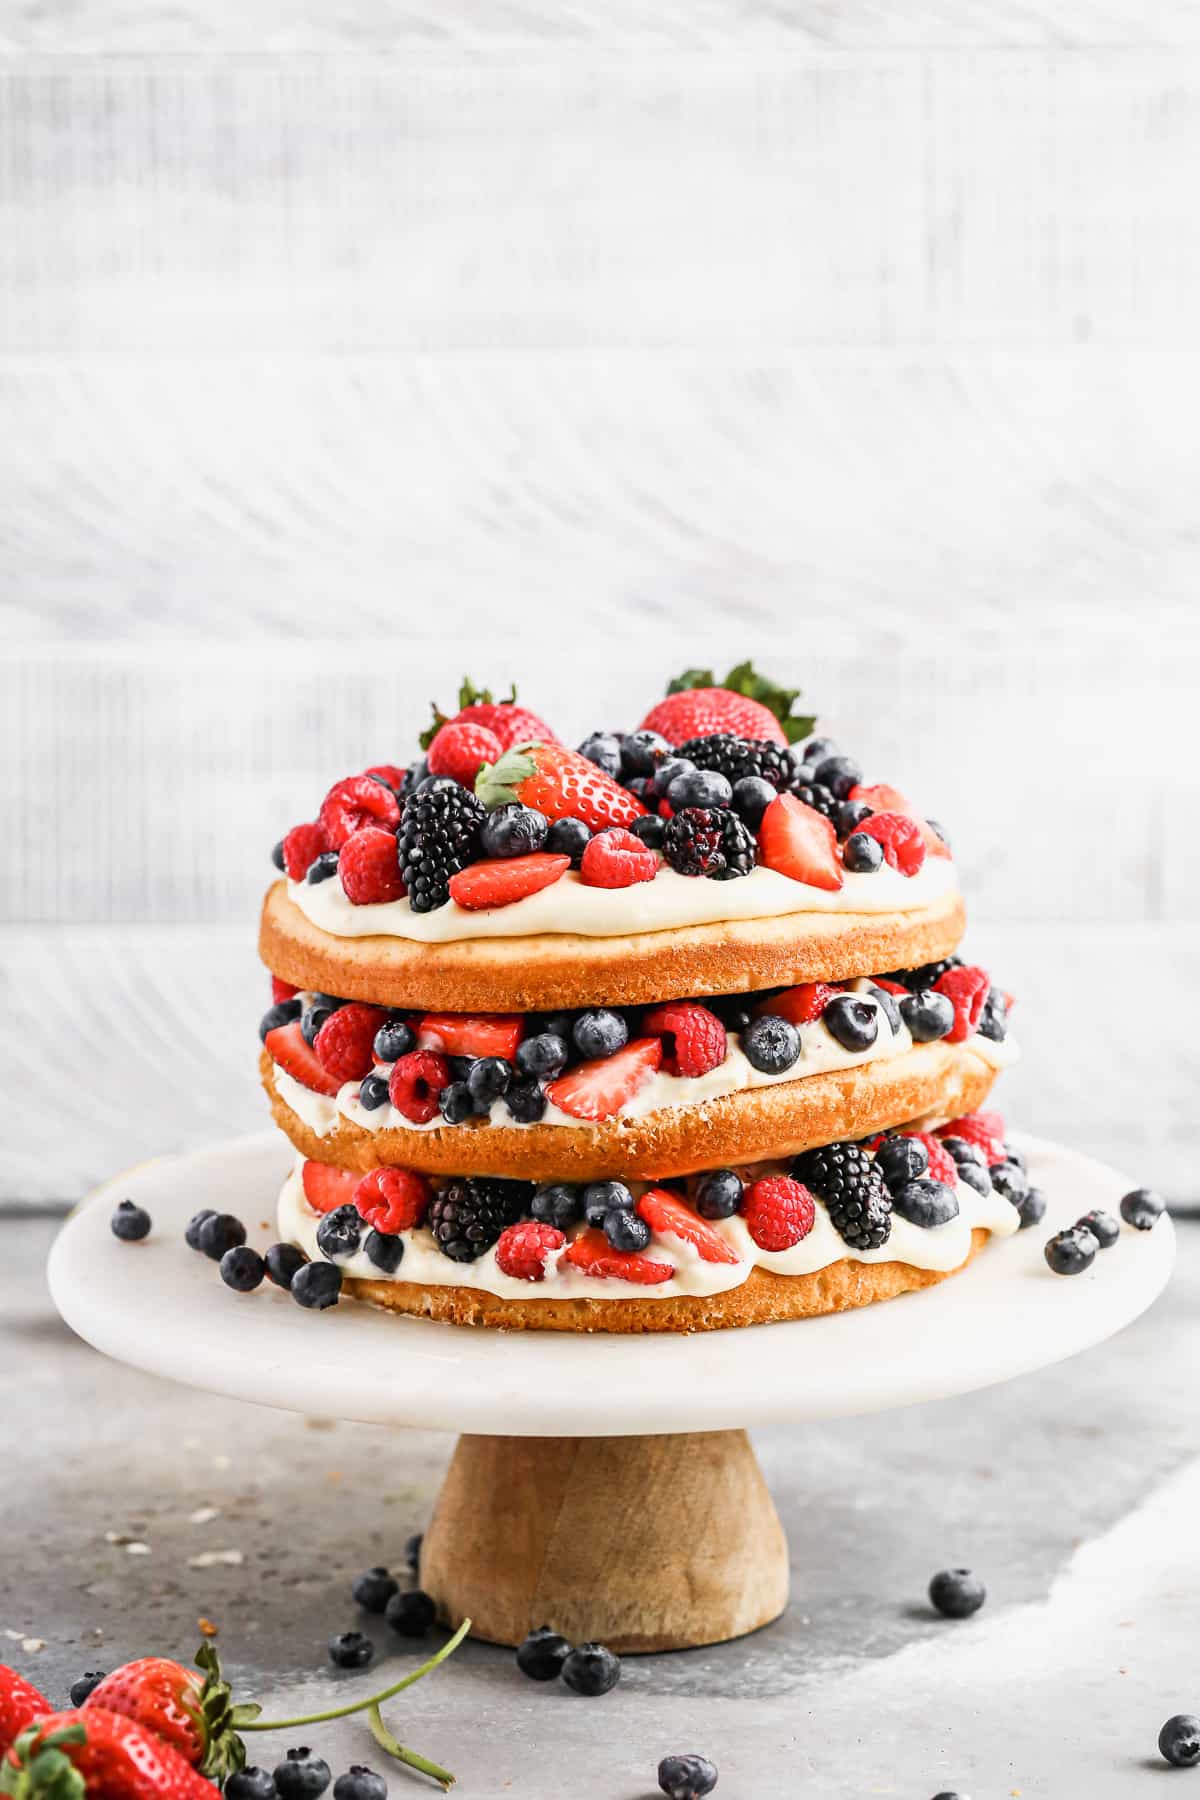 A fresh Berry Cake recipe with three tiers of yellow cake, topped with lemon mousse, and fresh berries.